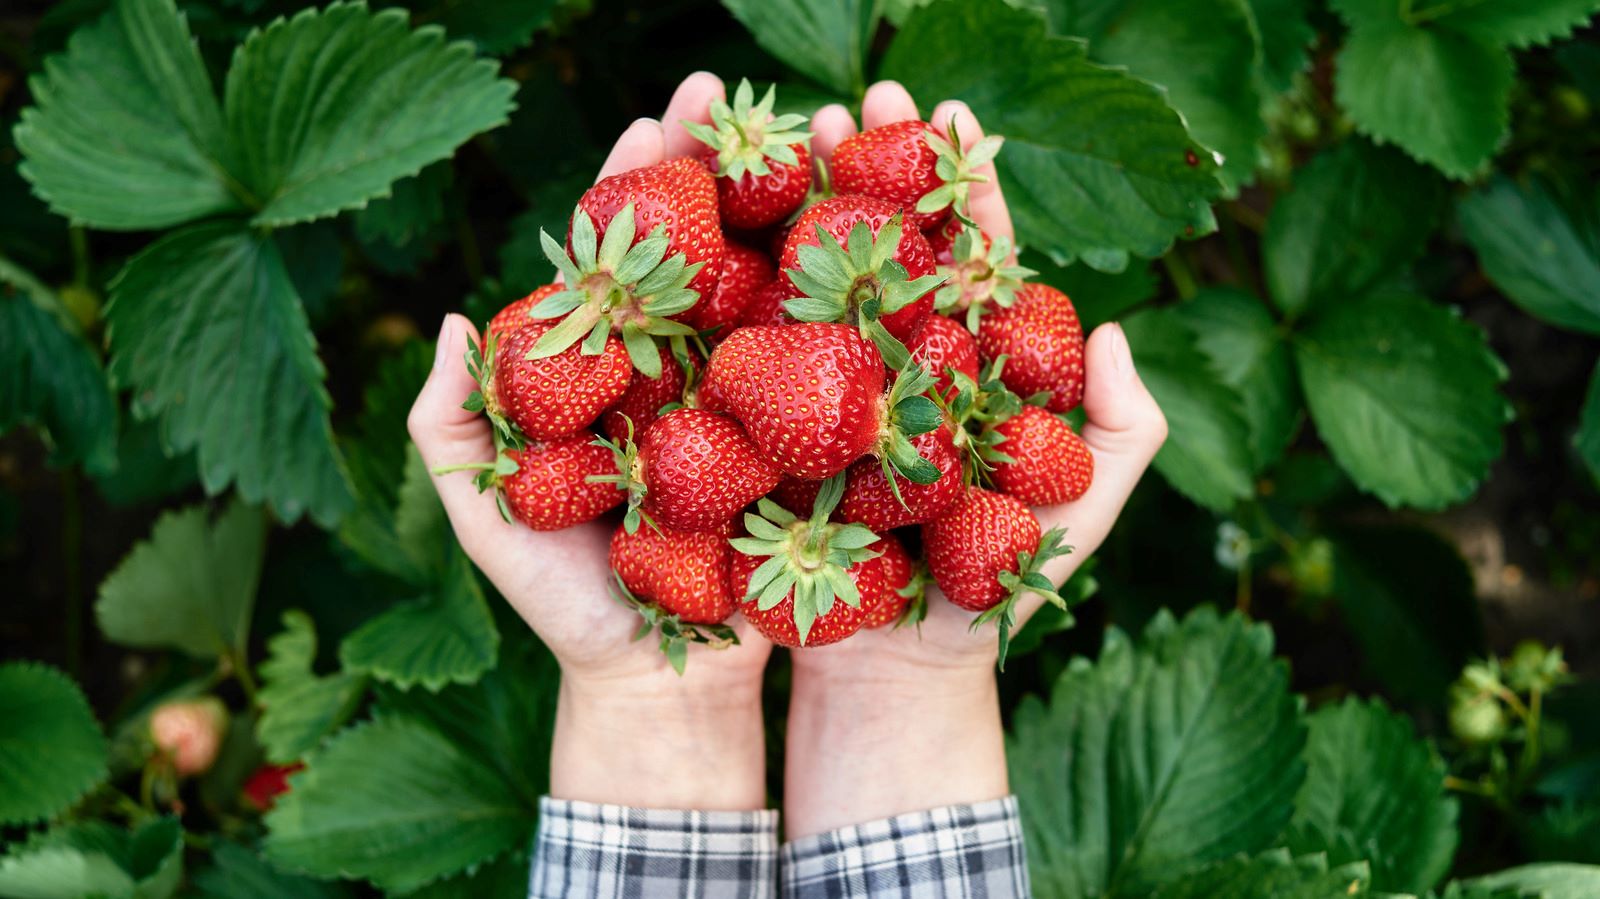 How To Store Fresh Strawberries After Picking